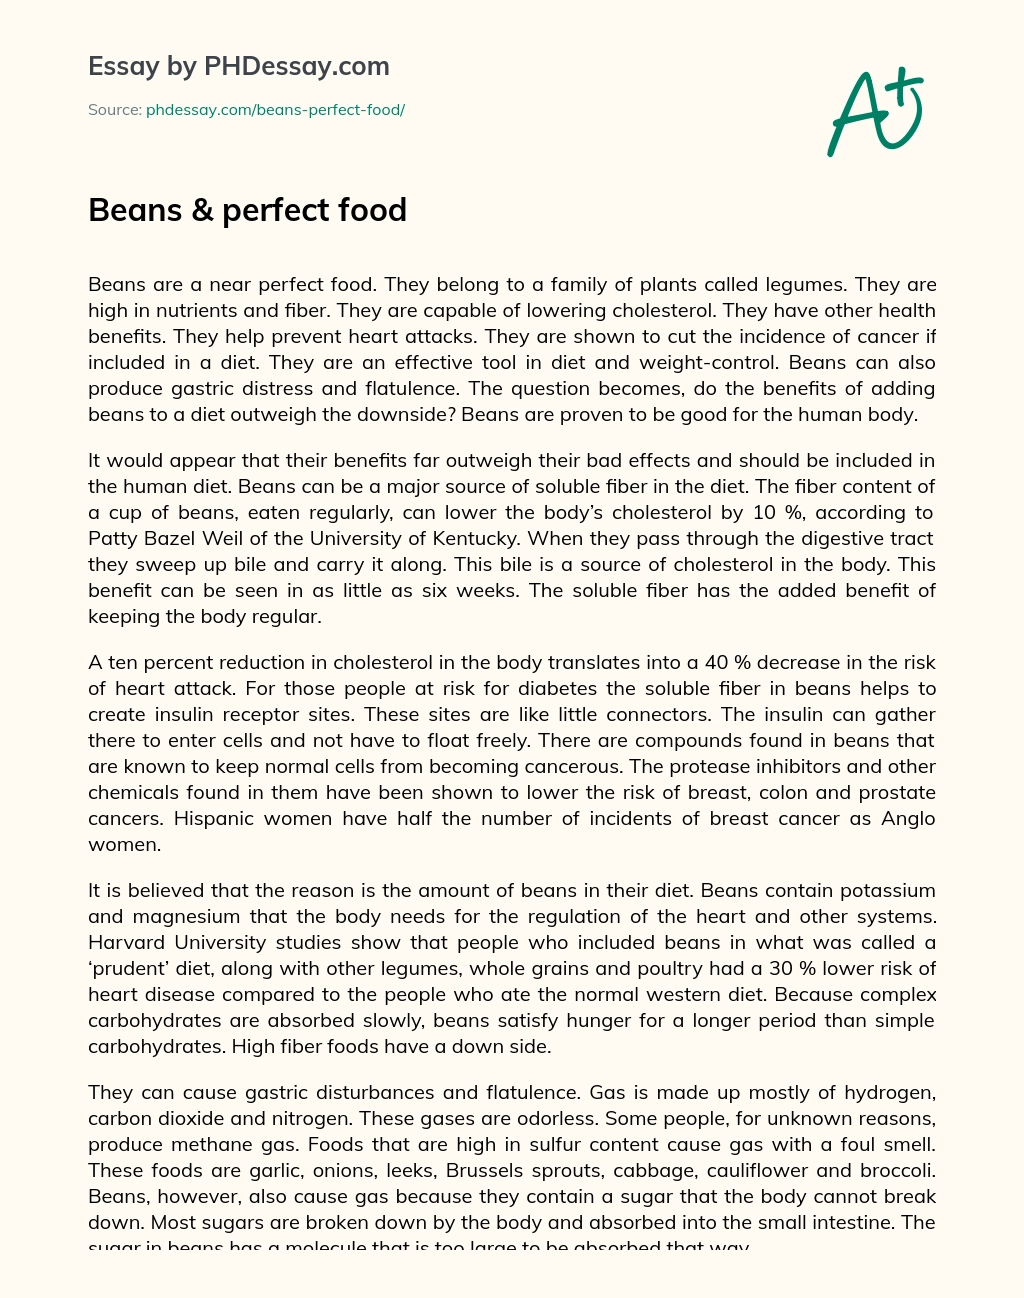 Beans & perfect food essay